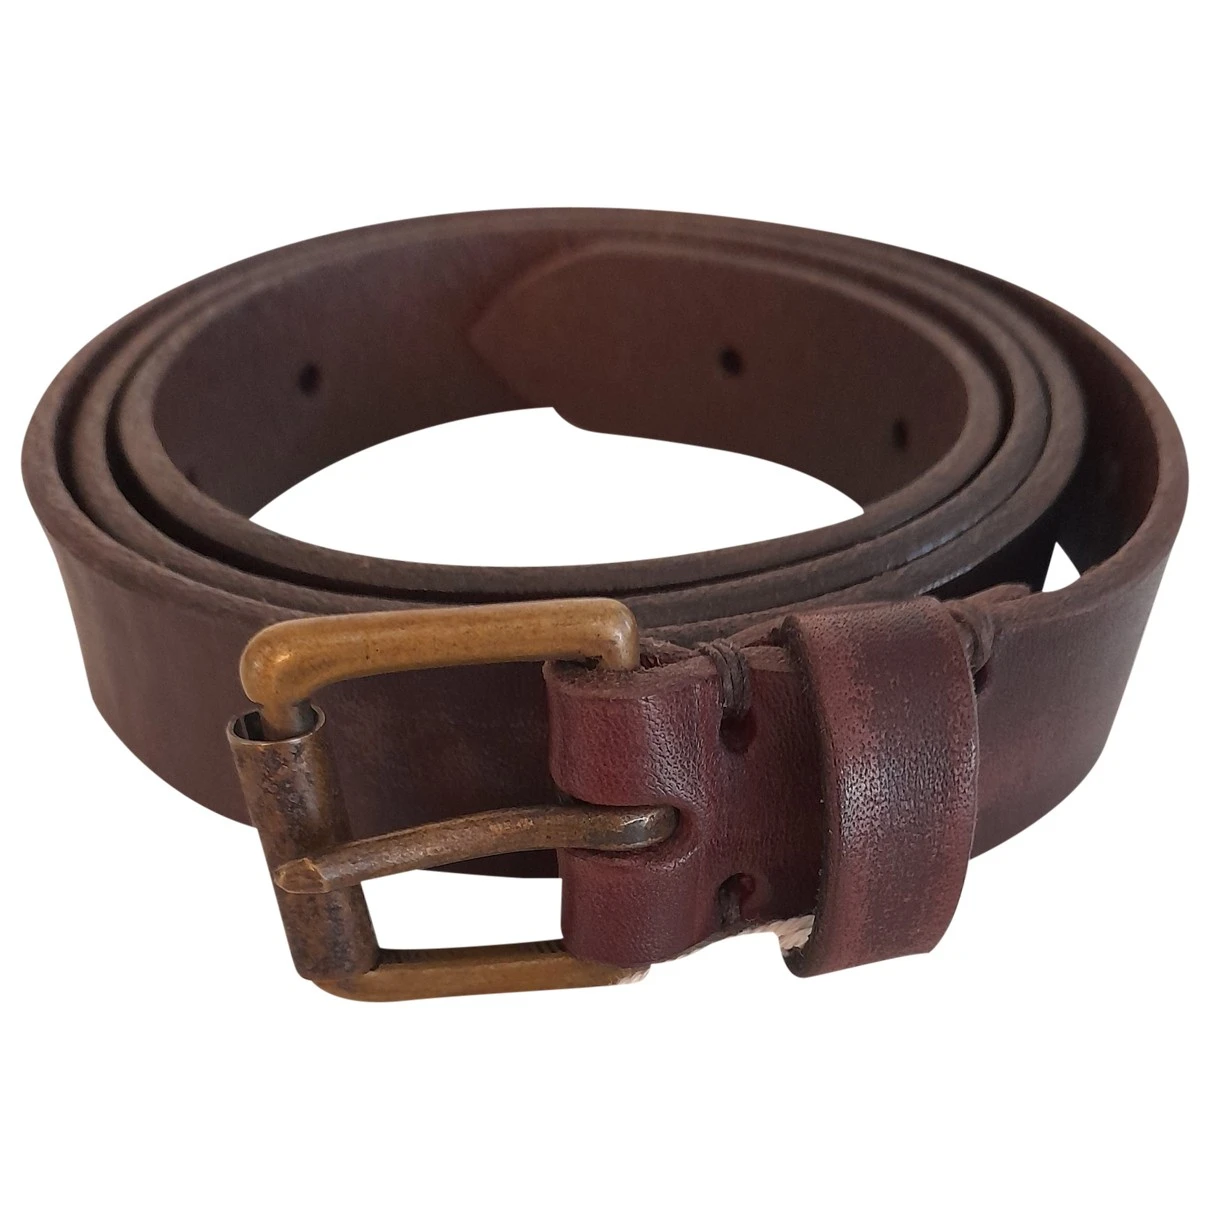 accessories Hartford belts for Female Leather 90 cm. Used condition